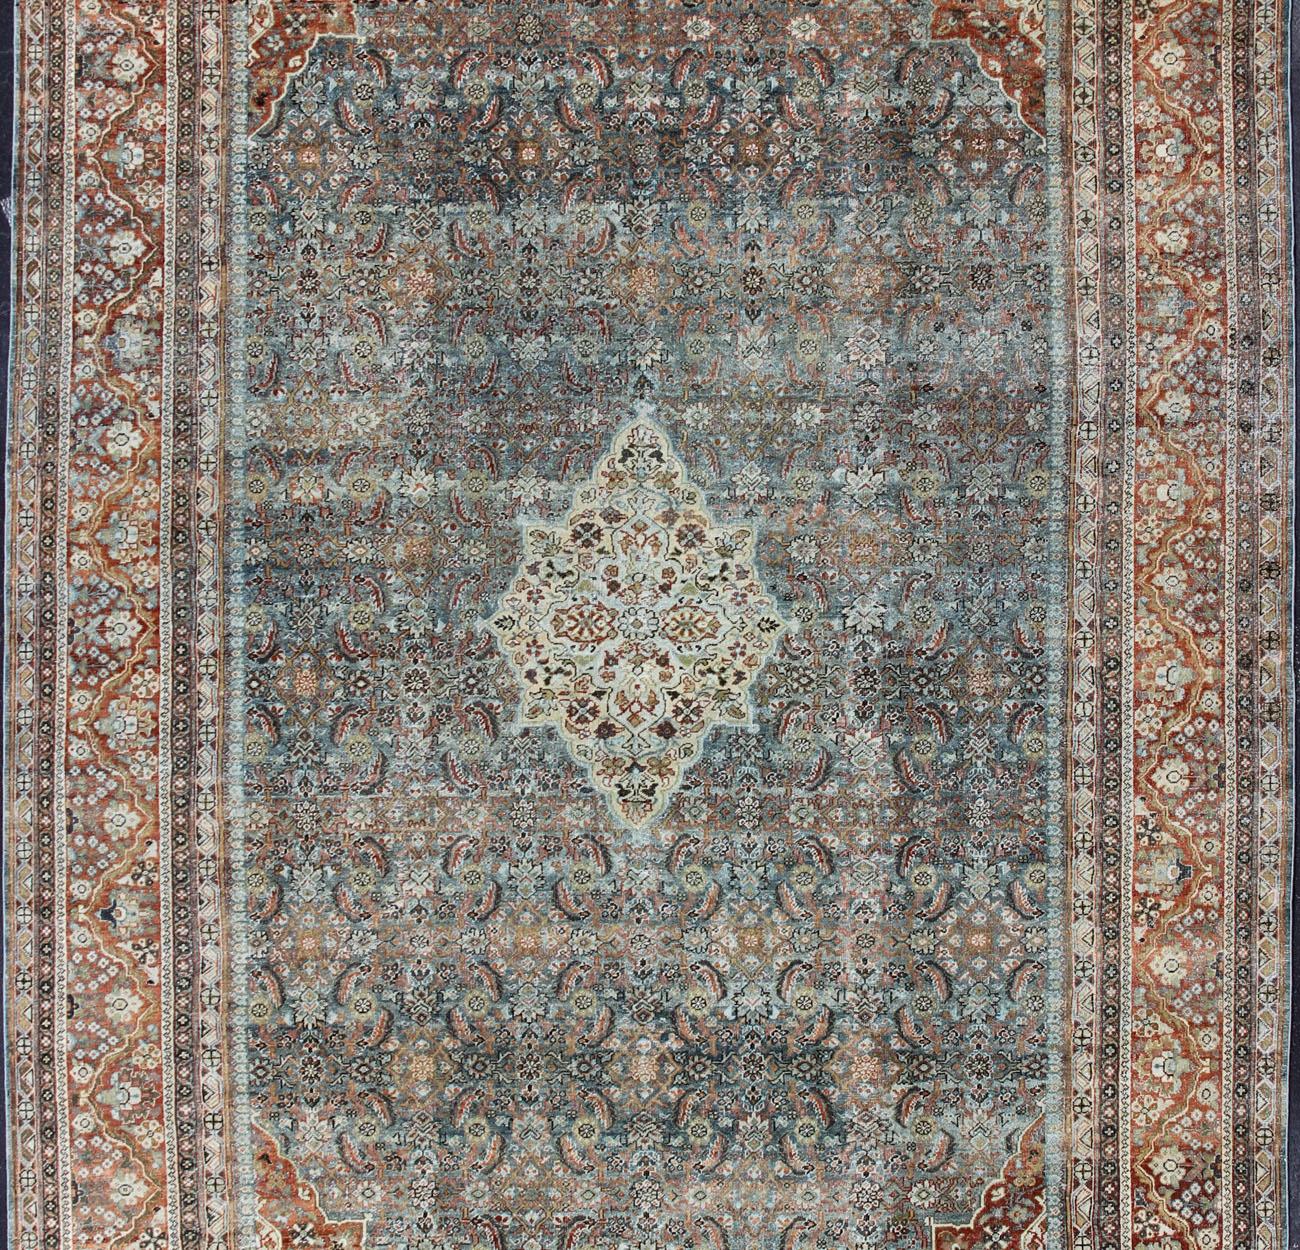 Sultanabad Mahal antique rug from Persia with all-over geometric design and small medallion and four cornices. Keivan Woven Arts/ rug 1912-175, country of origin / type: Iran / Mahal, circa 1920
Measures: 11'7 x 16'8 
This beautiful antique Persian